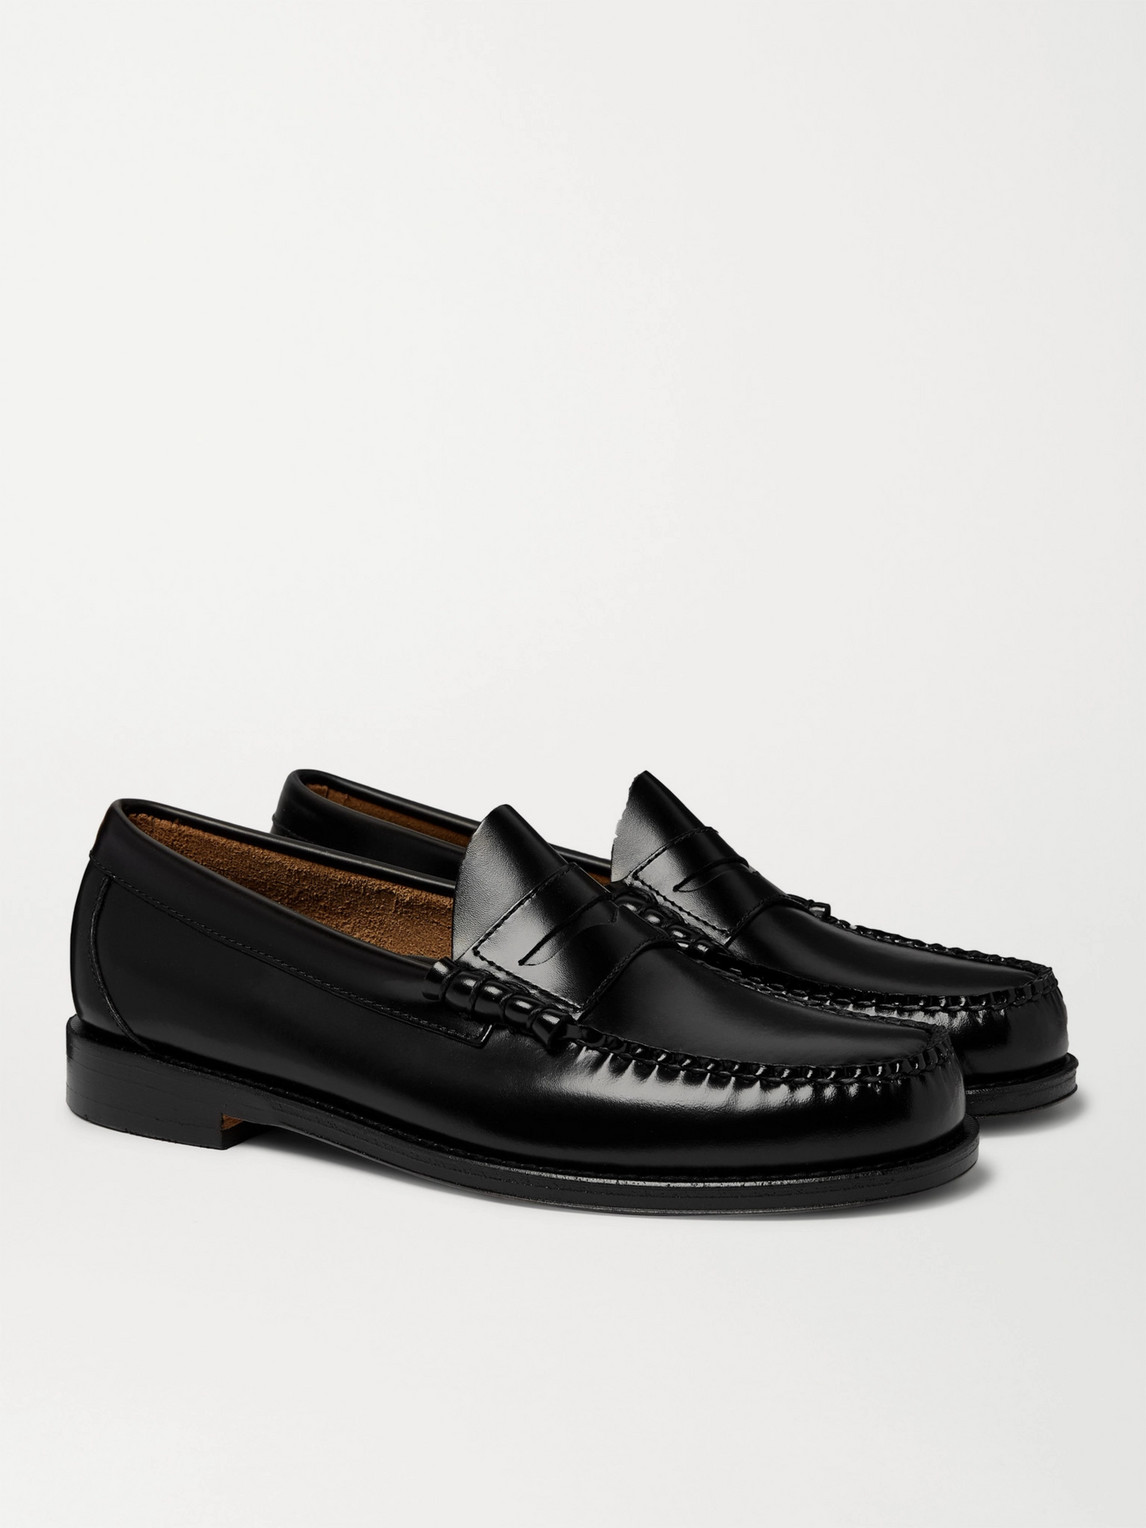 G.h. Bass Weejuns Heritage Larson Leather Penny Loafers In Black